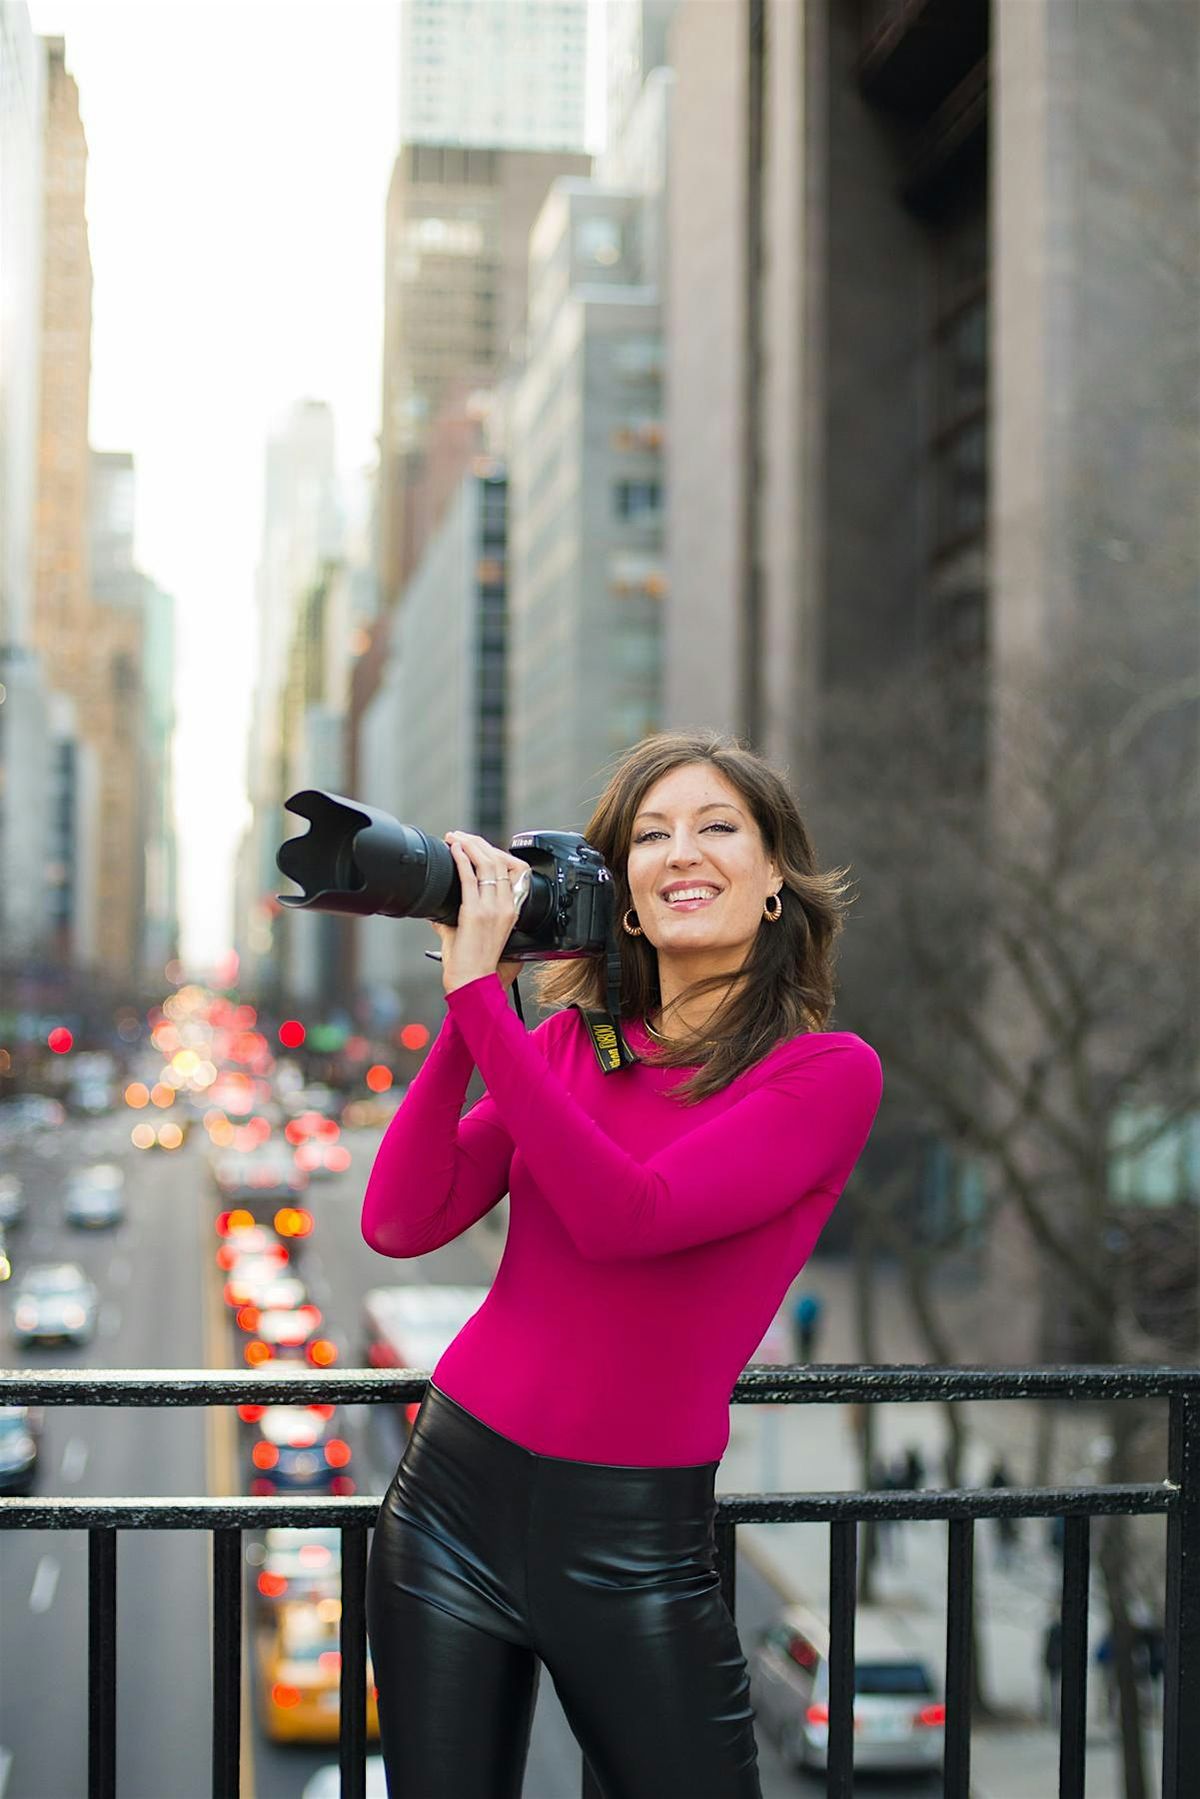 The Art of Capturing Love in NYC: A 2 Day Live Photography Workshop